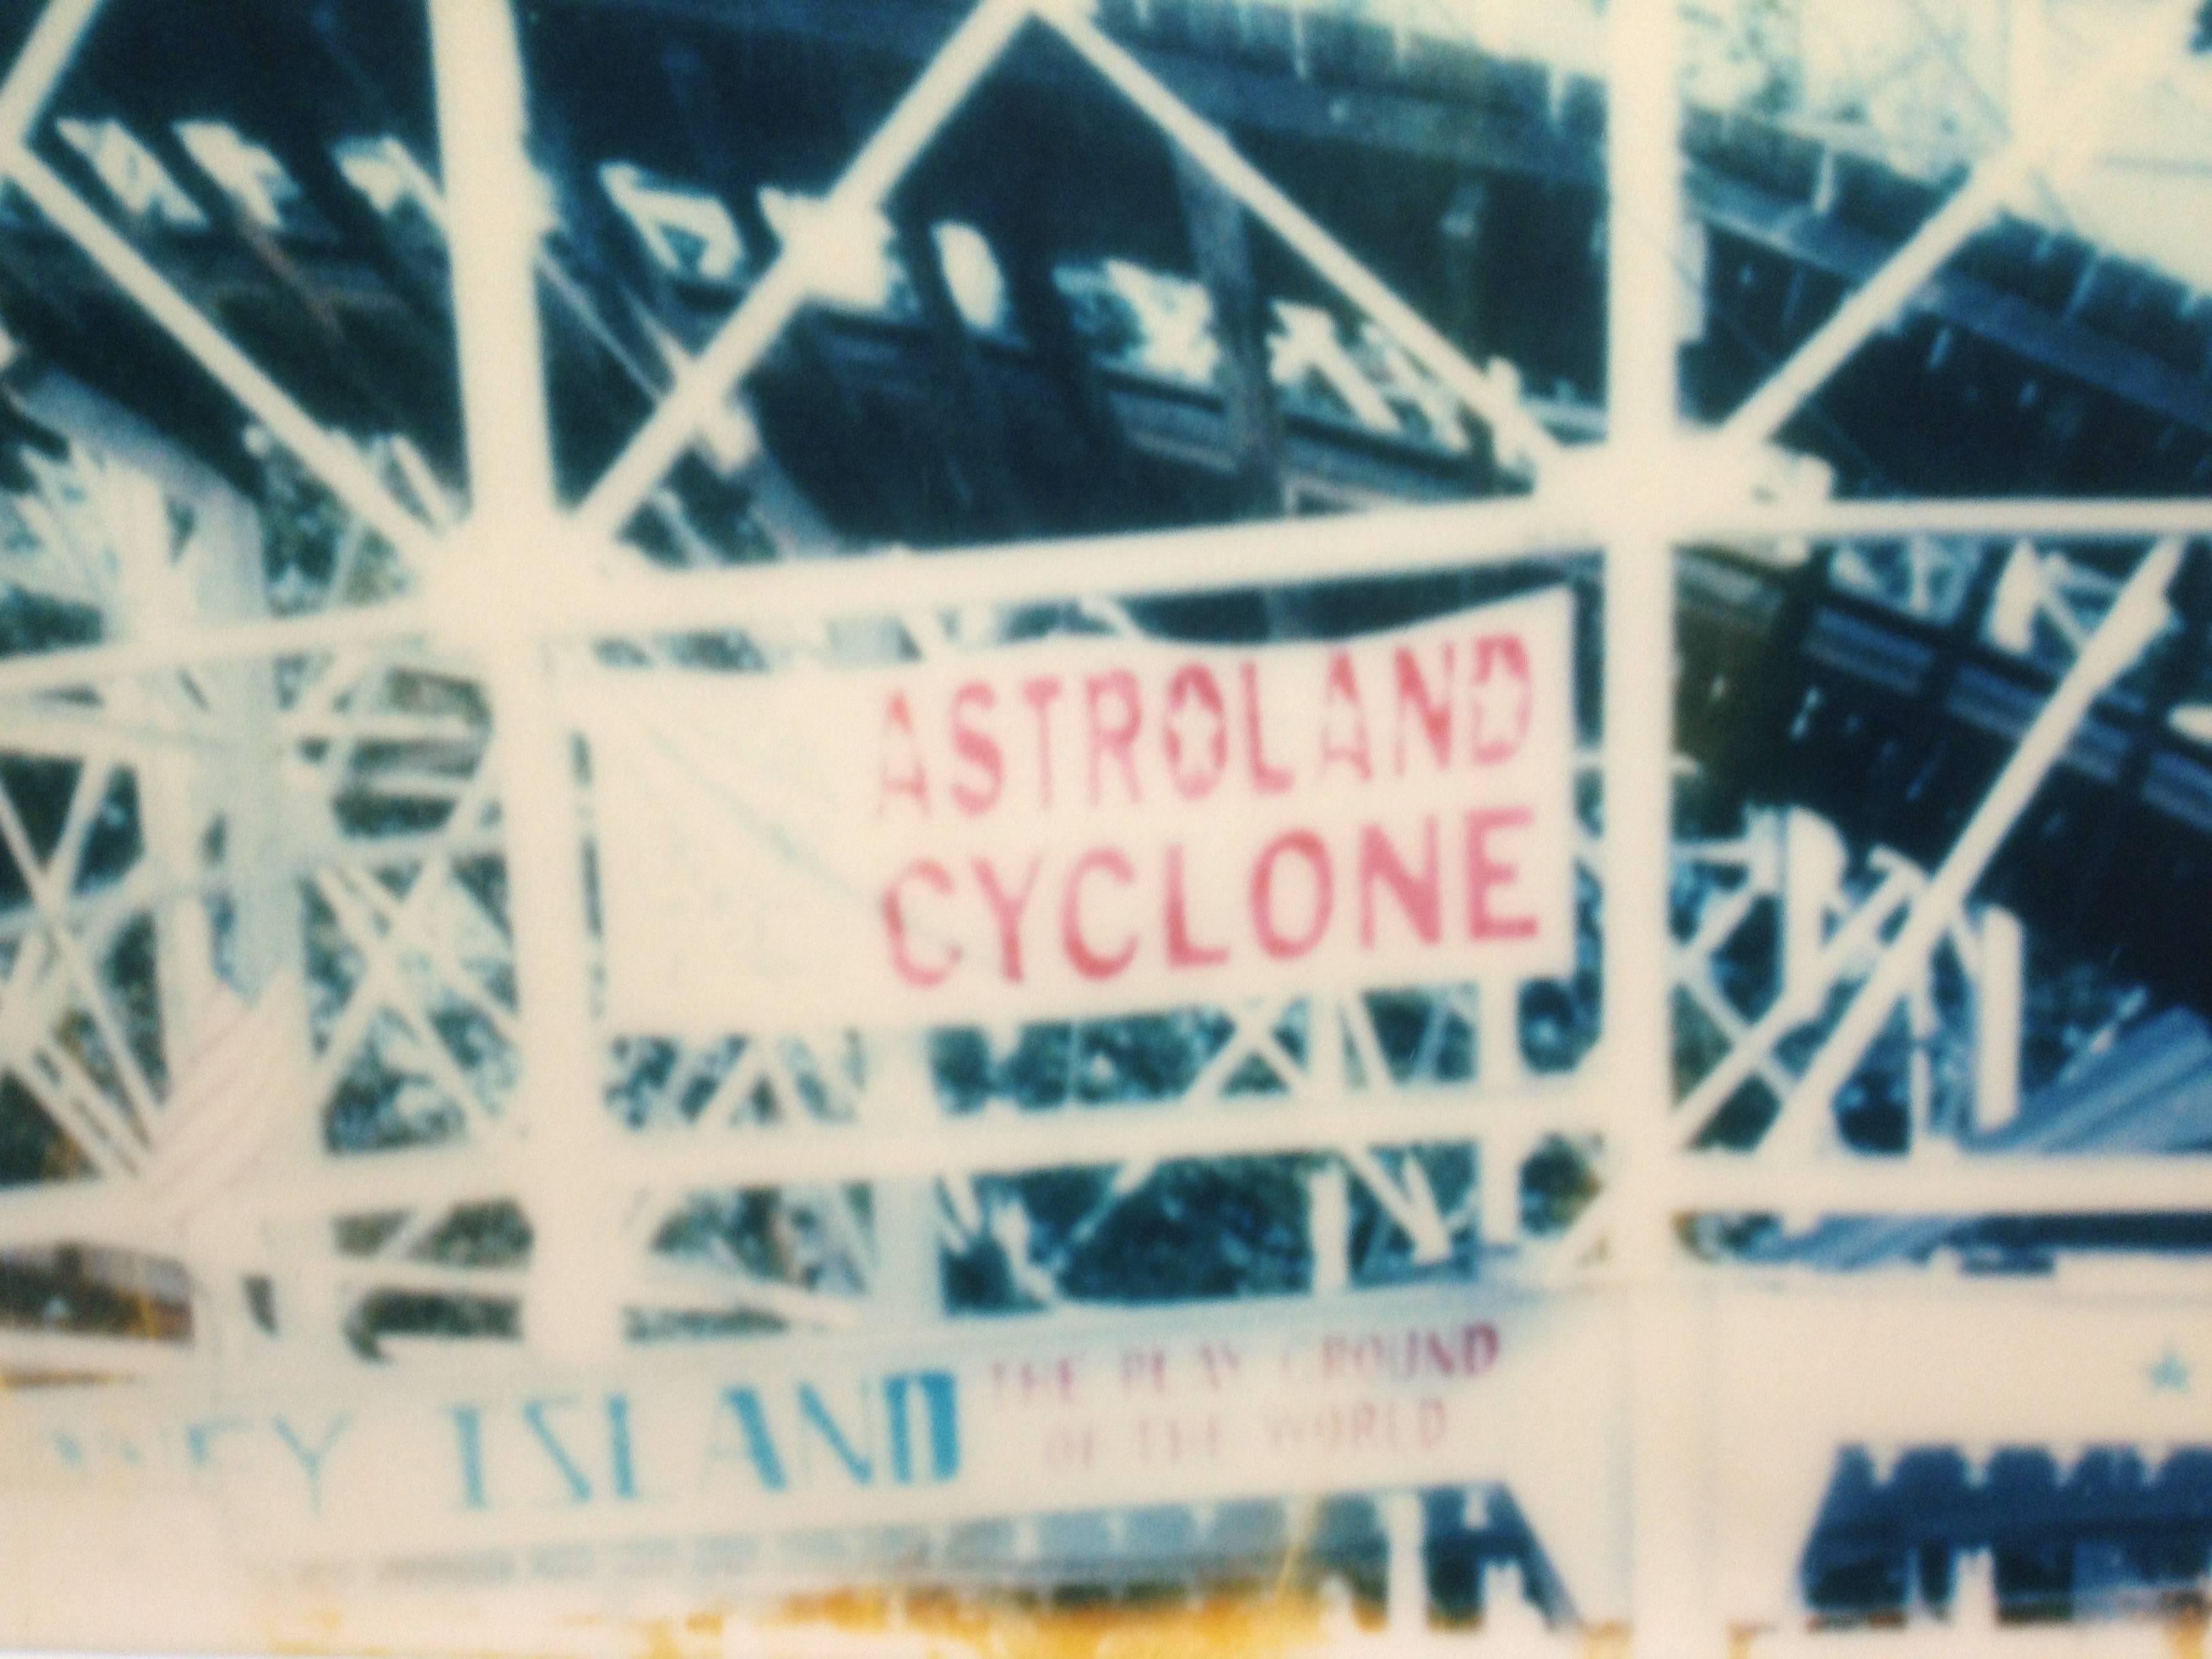 Cyclone from the movie Stay based on a Polaroid - Contemporary Photograph by Stefanie Schneider